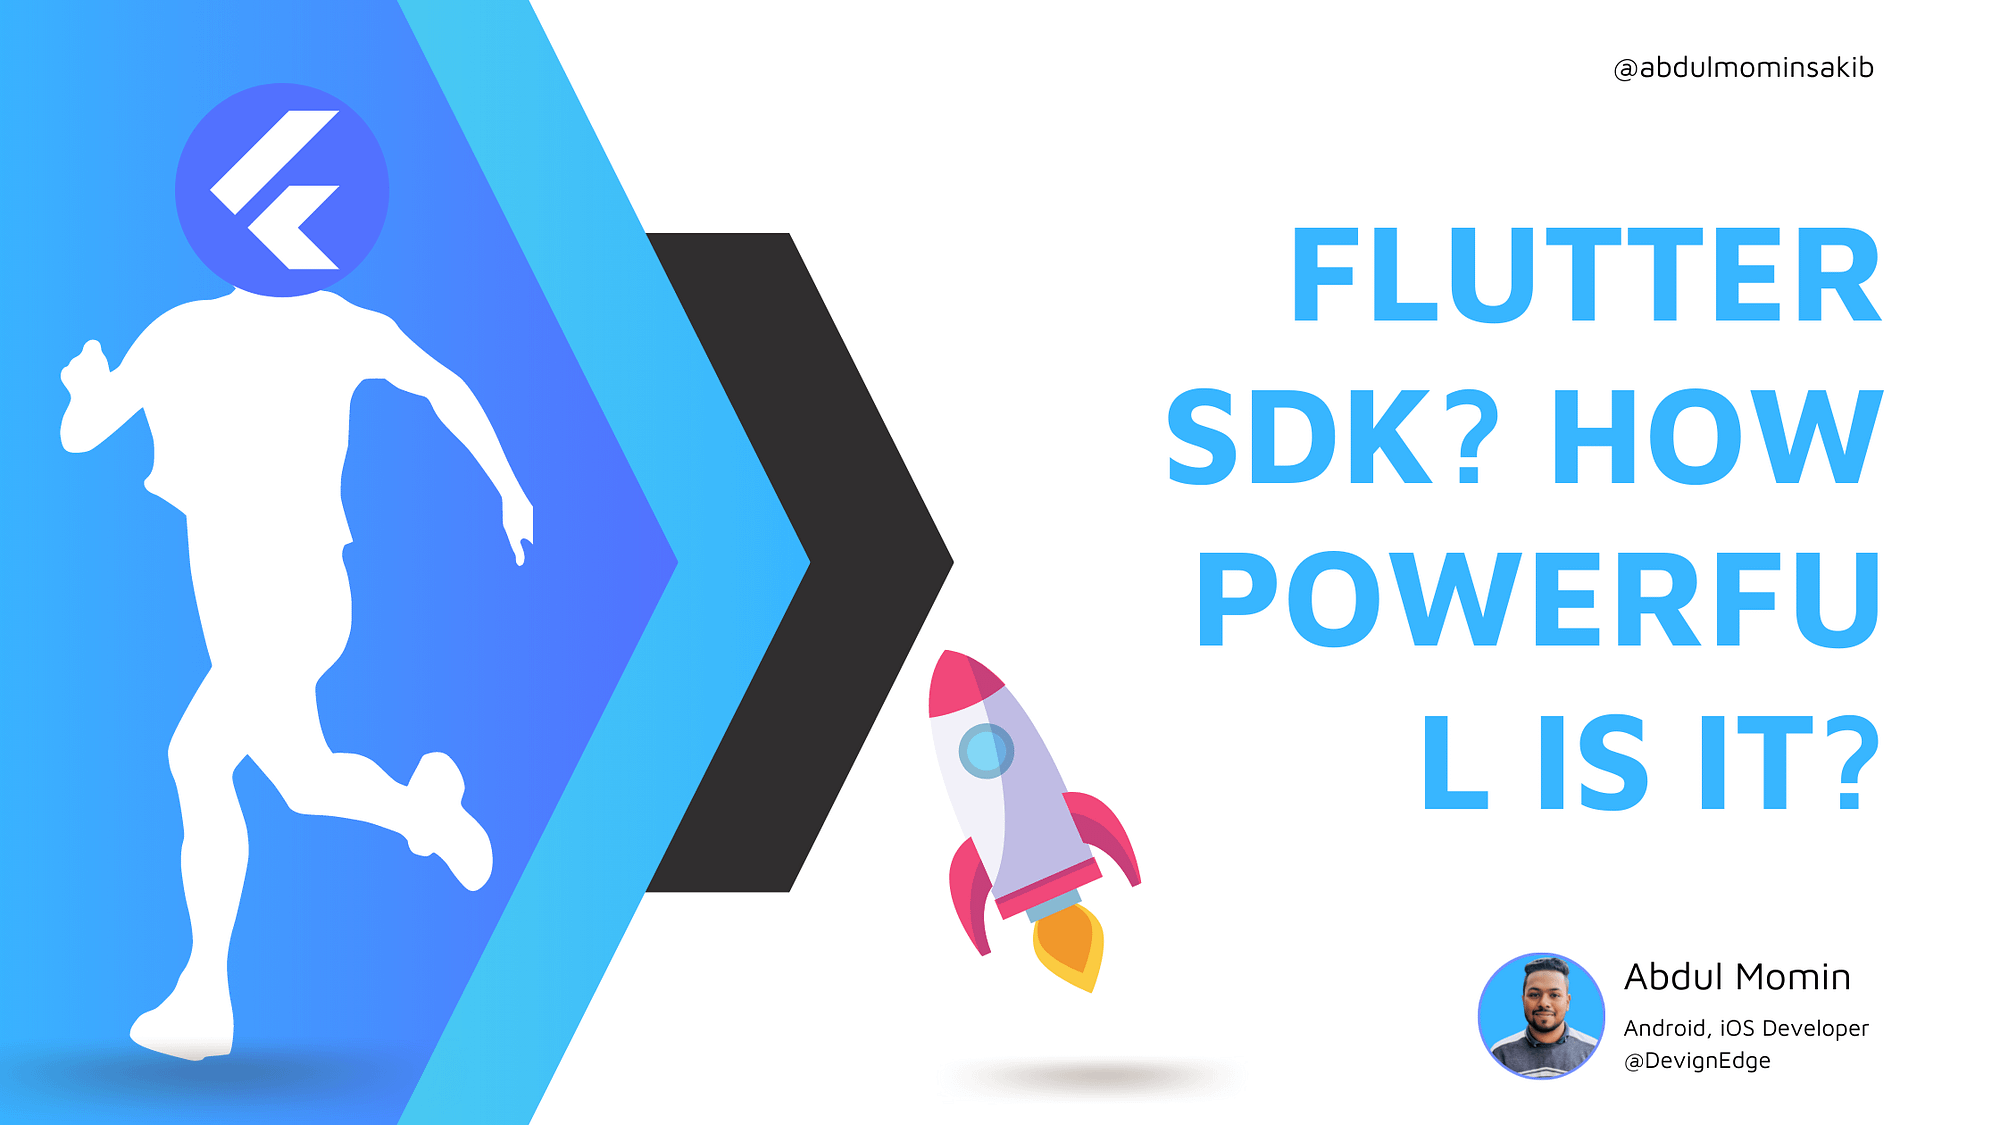 Flutter SDK How powerful it is Post Image